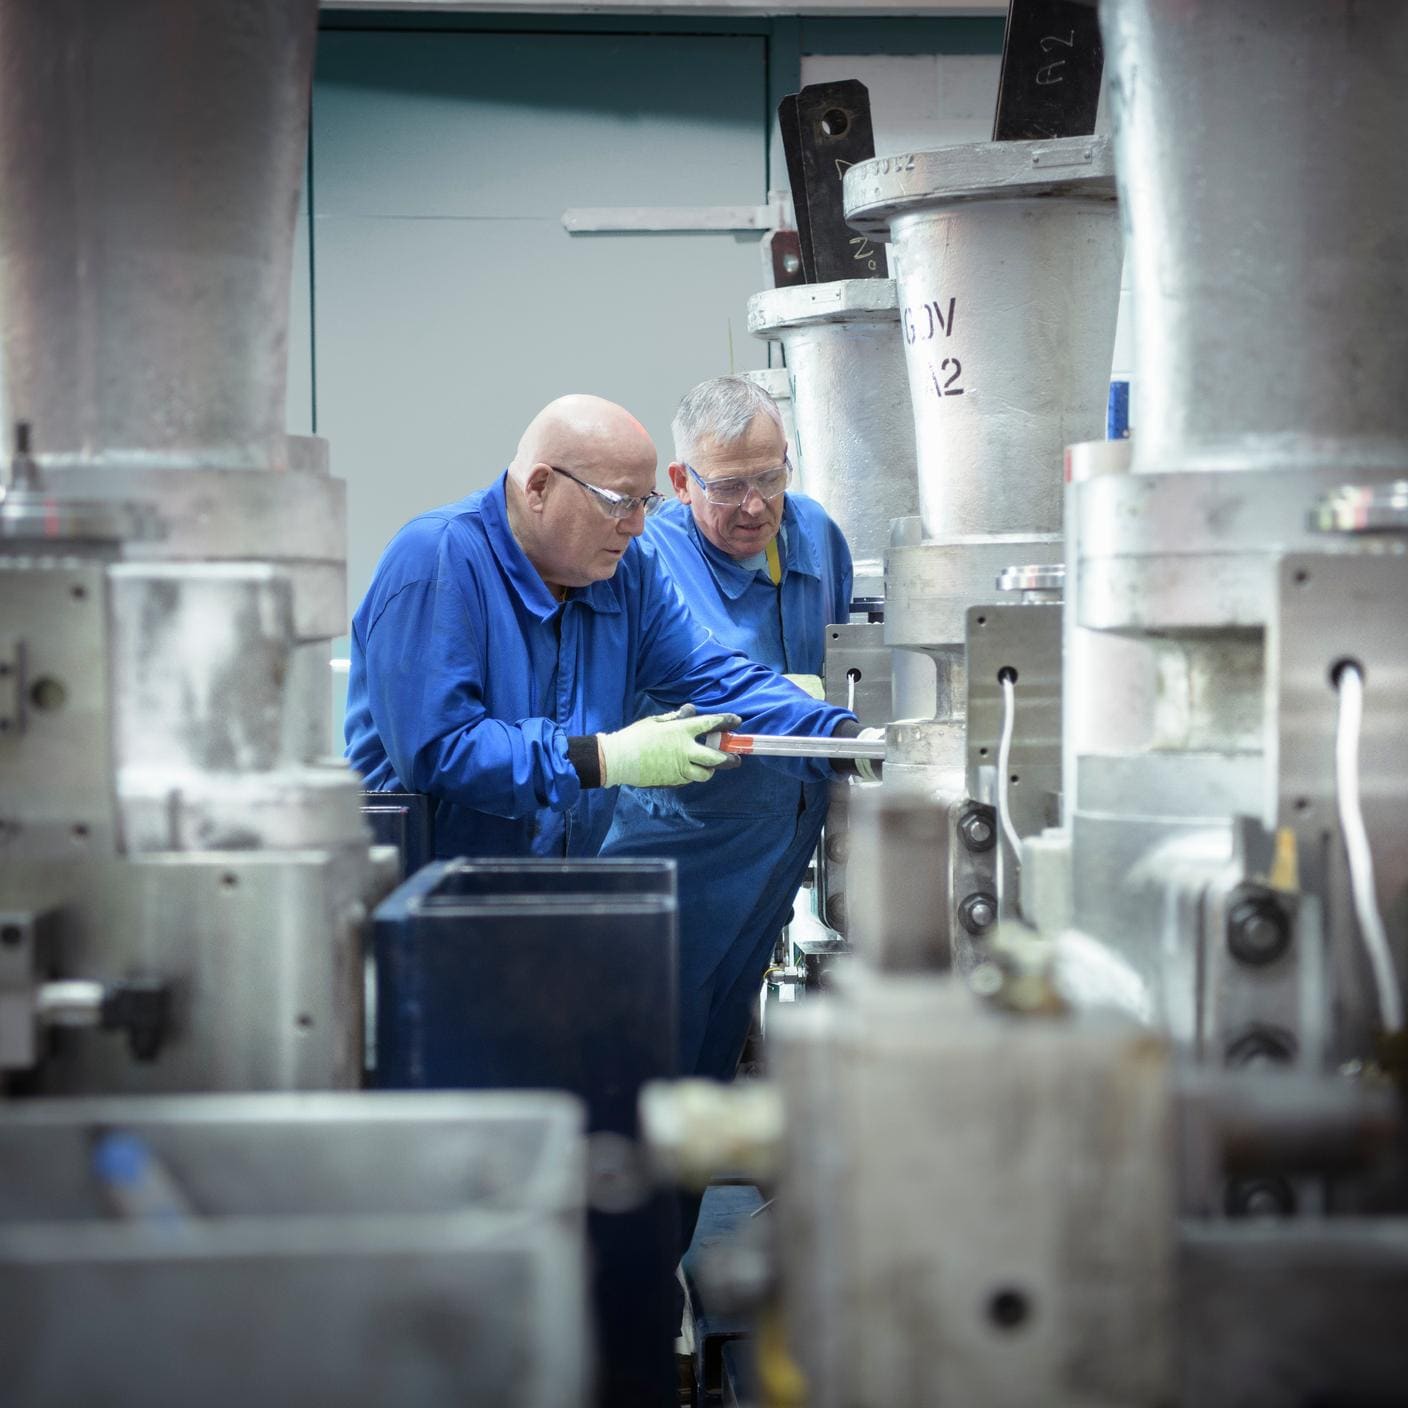 Case study – ANSTO BSI certification to ISO 45001 - Two engineers inspecting a valve in a nuclear power station